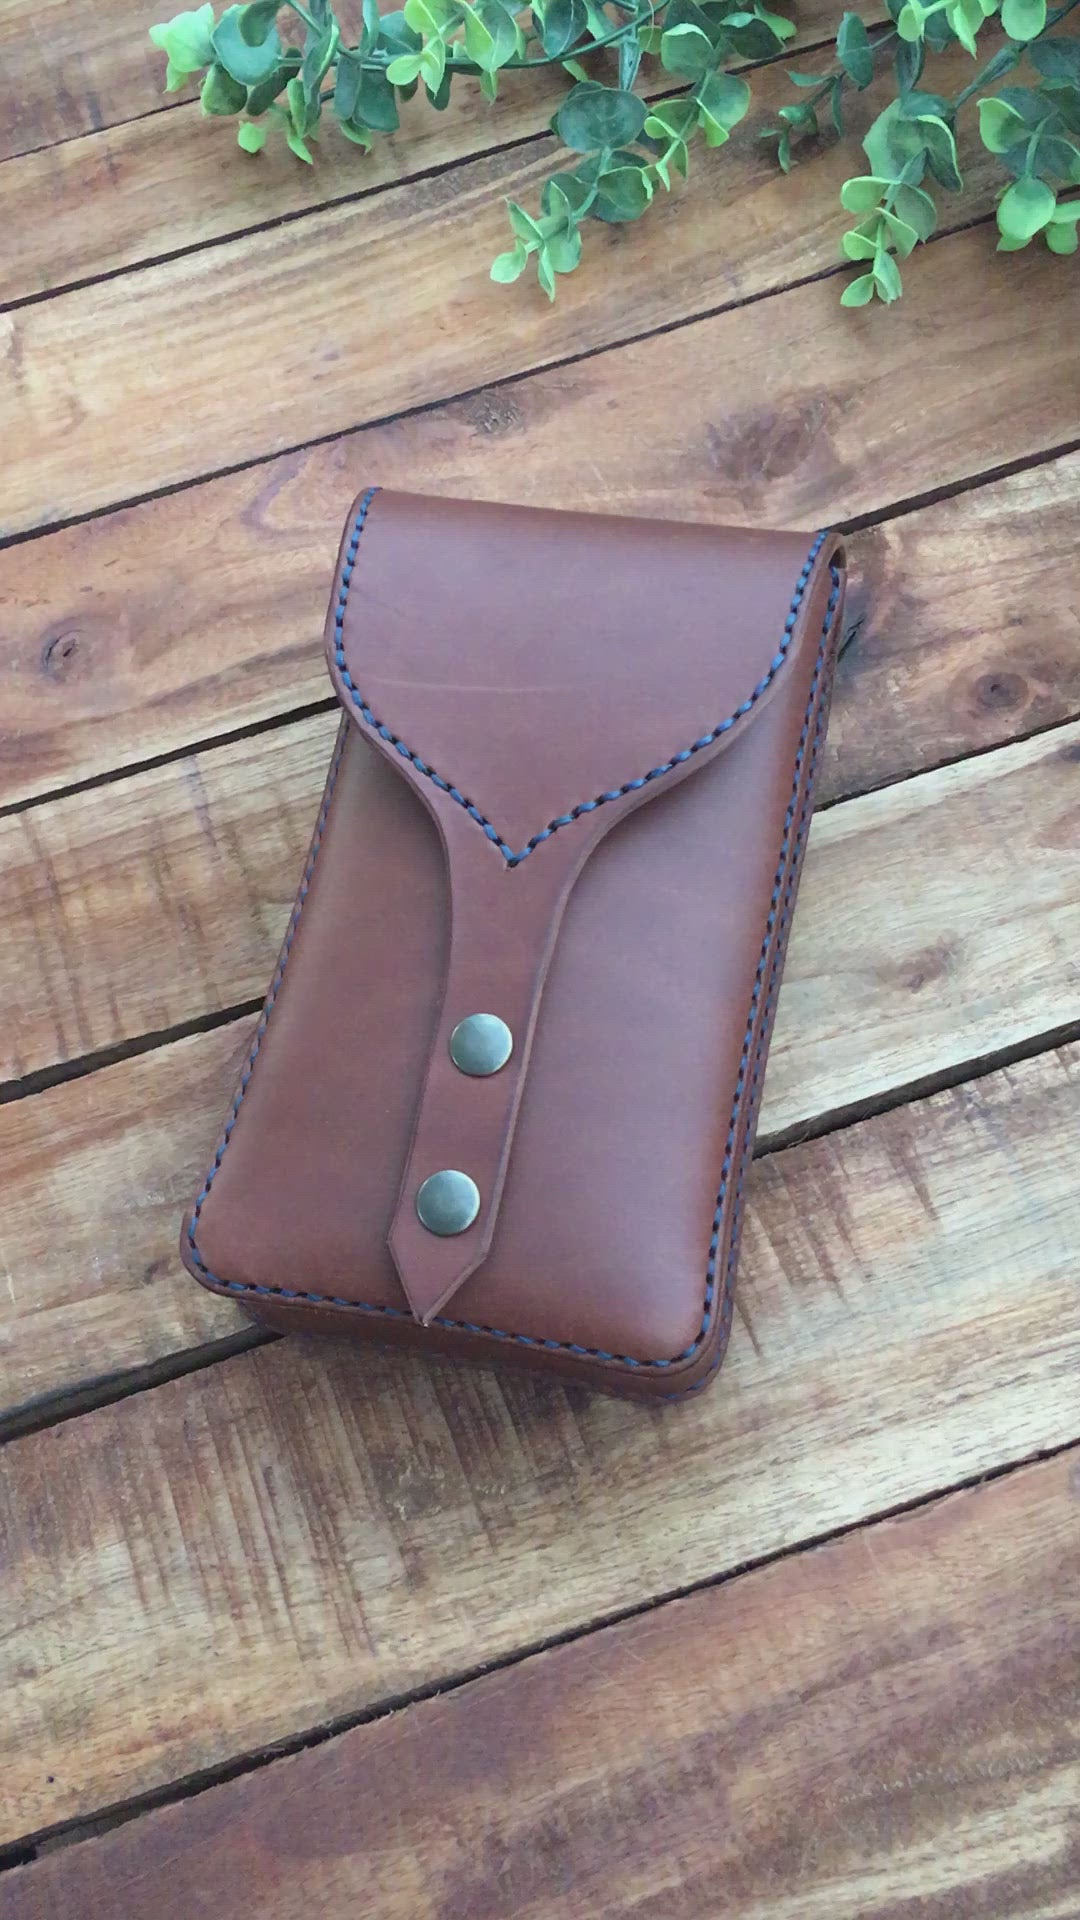 Video Showing a Handmade Brown Leather Festival Belt Pouch with Blue Stitching